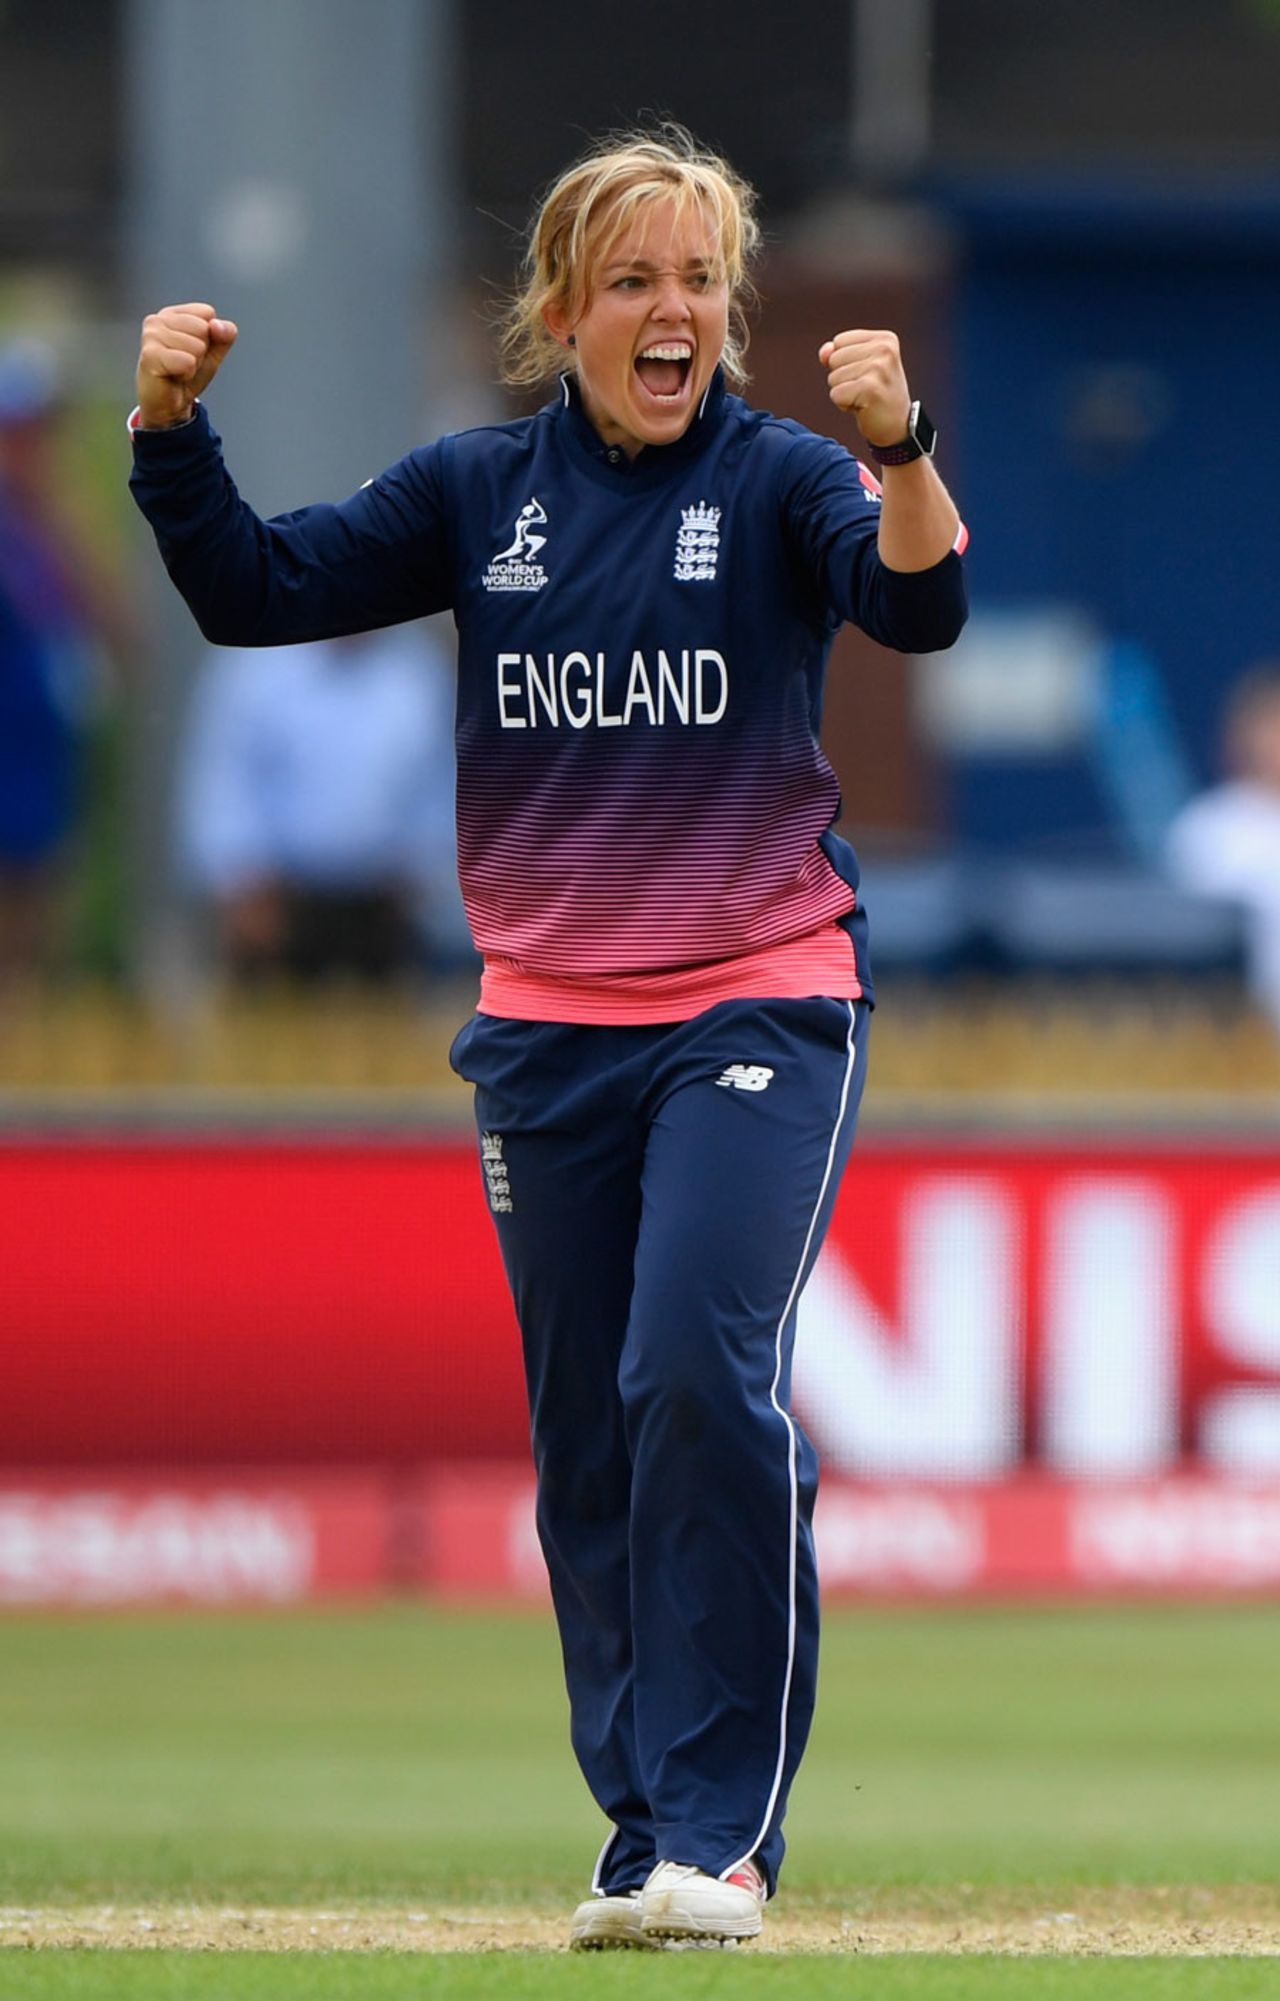 Danielle Hazell claimed the wicket of Punam Raut, England v India, Women's World Cup, Derby, June 24, 2017